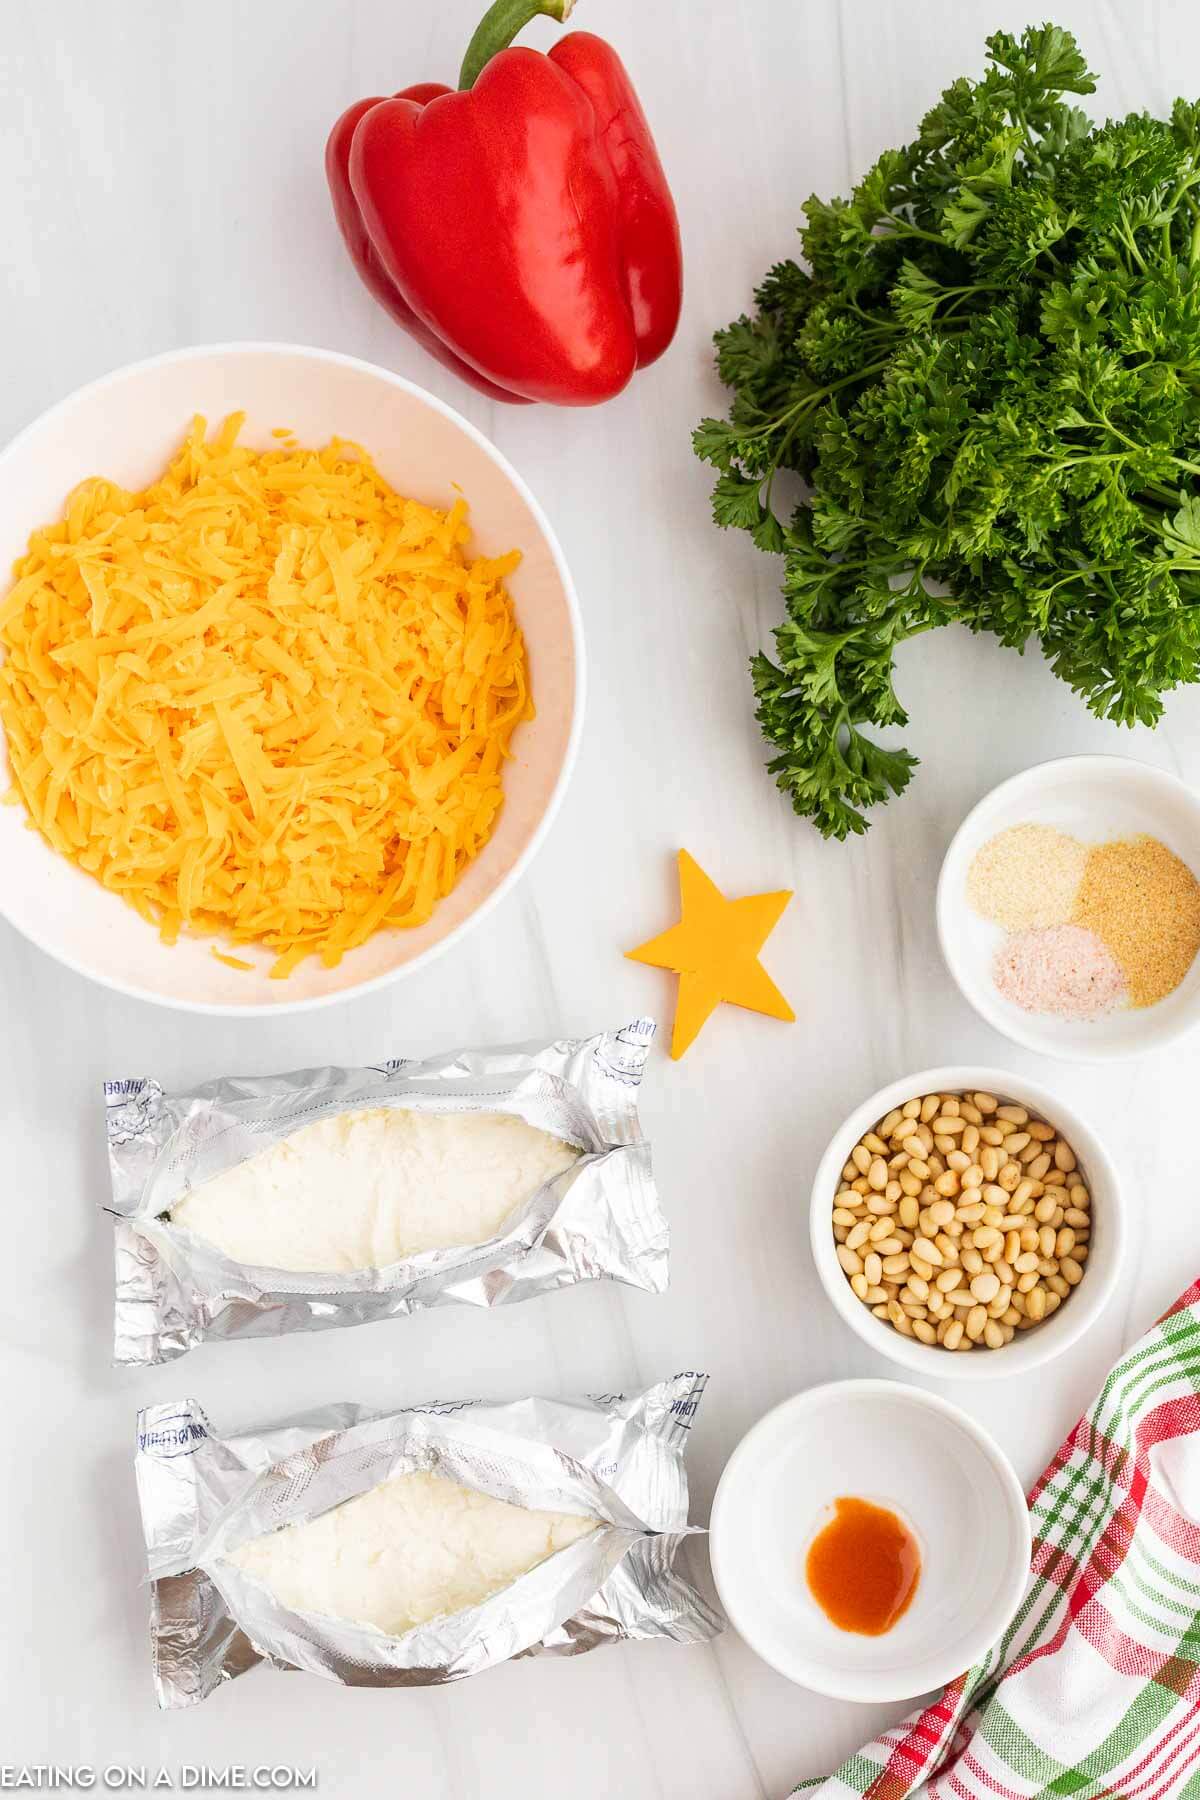 Ingredients for cheese ball- cream cheese, shredded cheese, seasonings, nuts. 